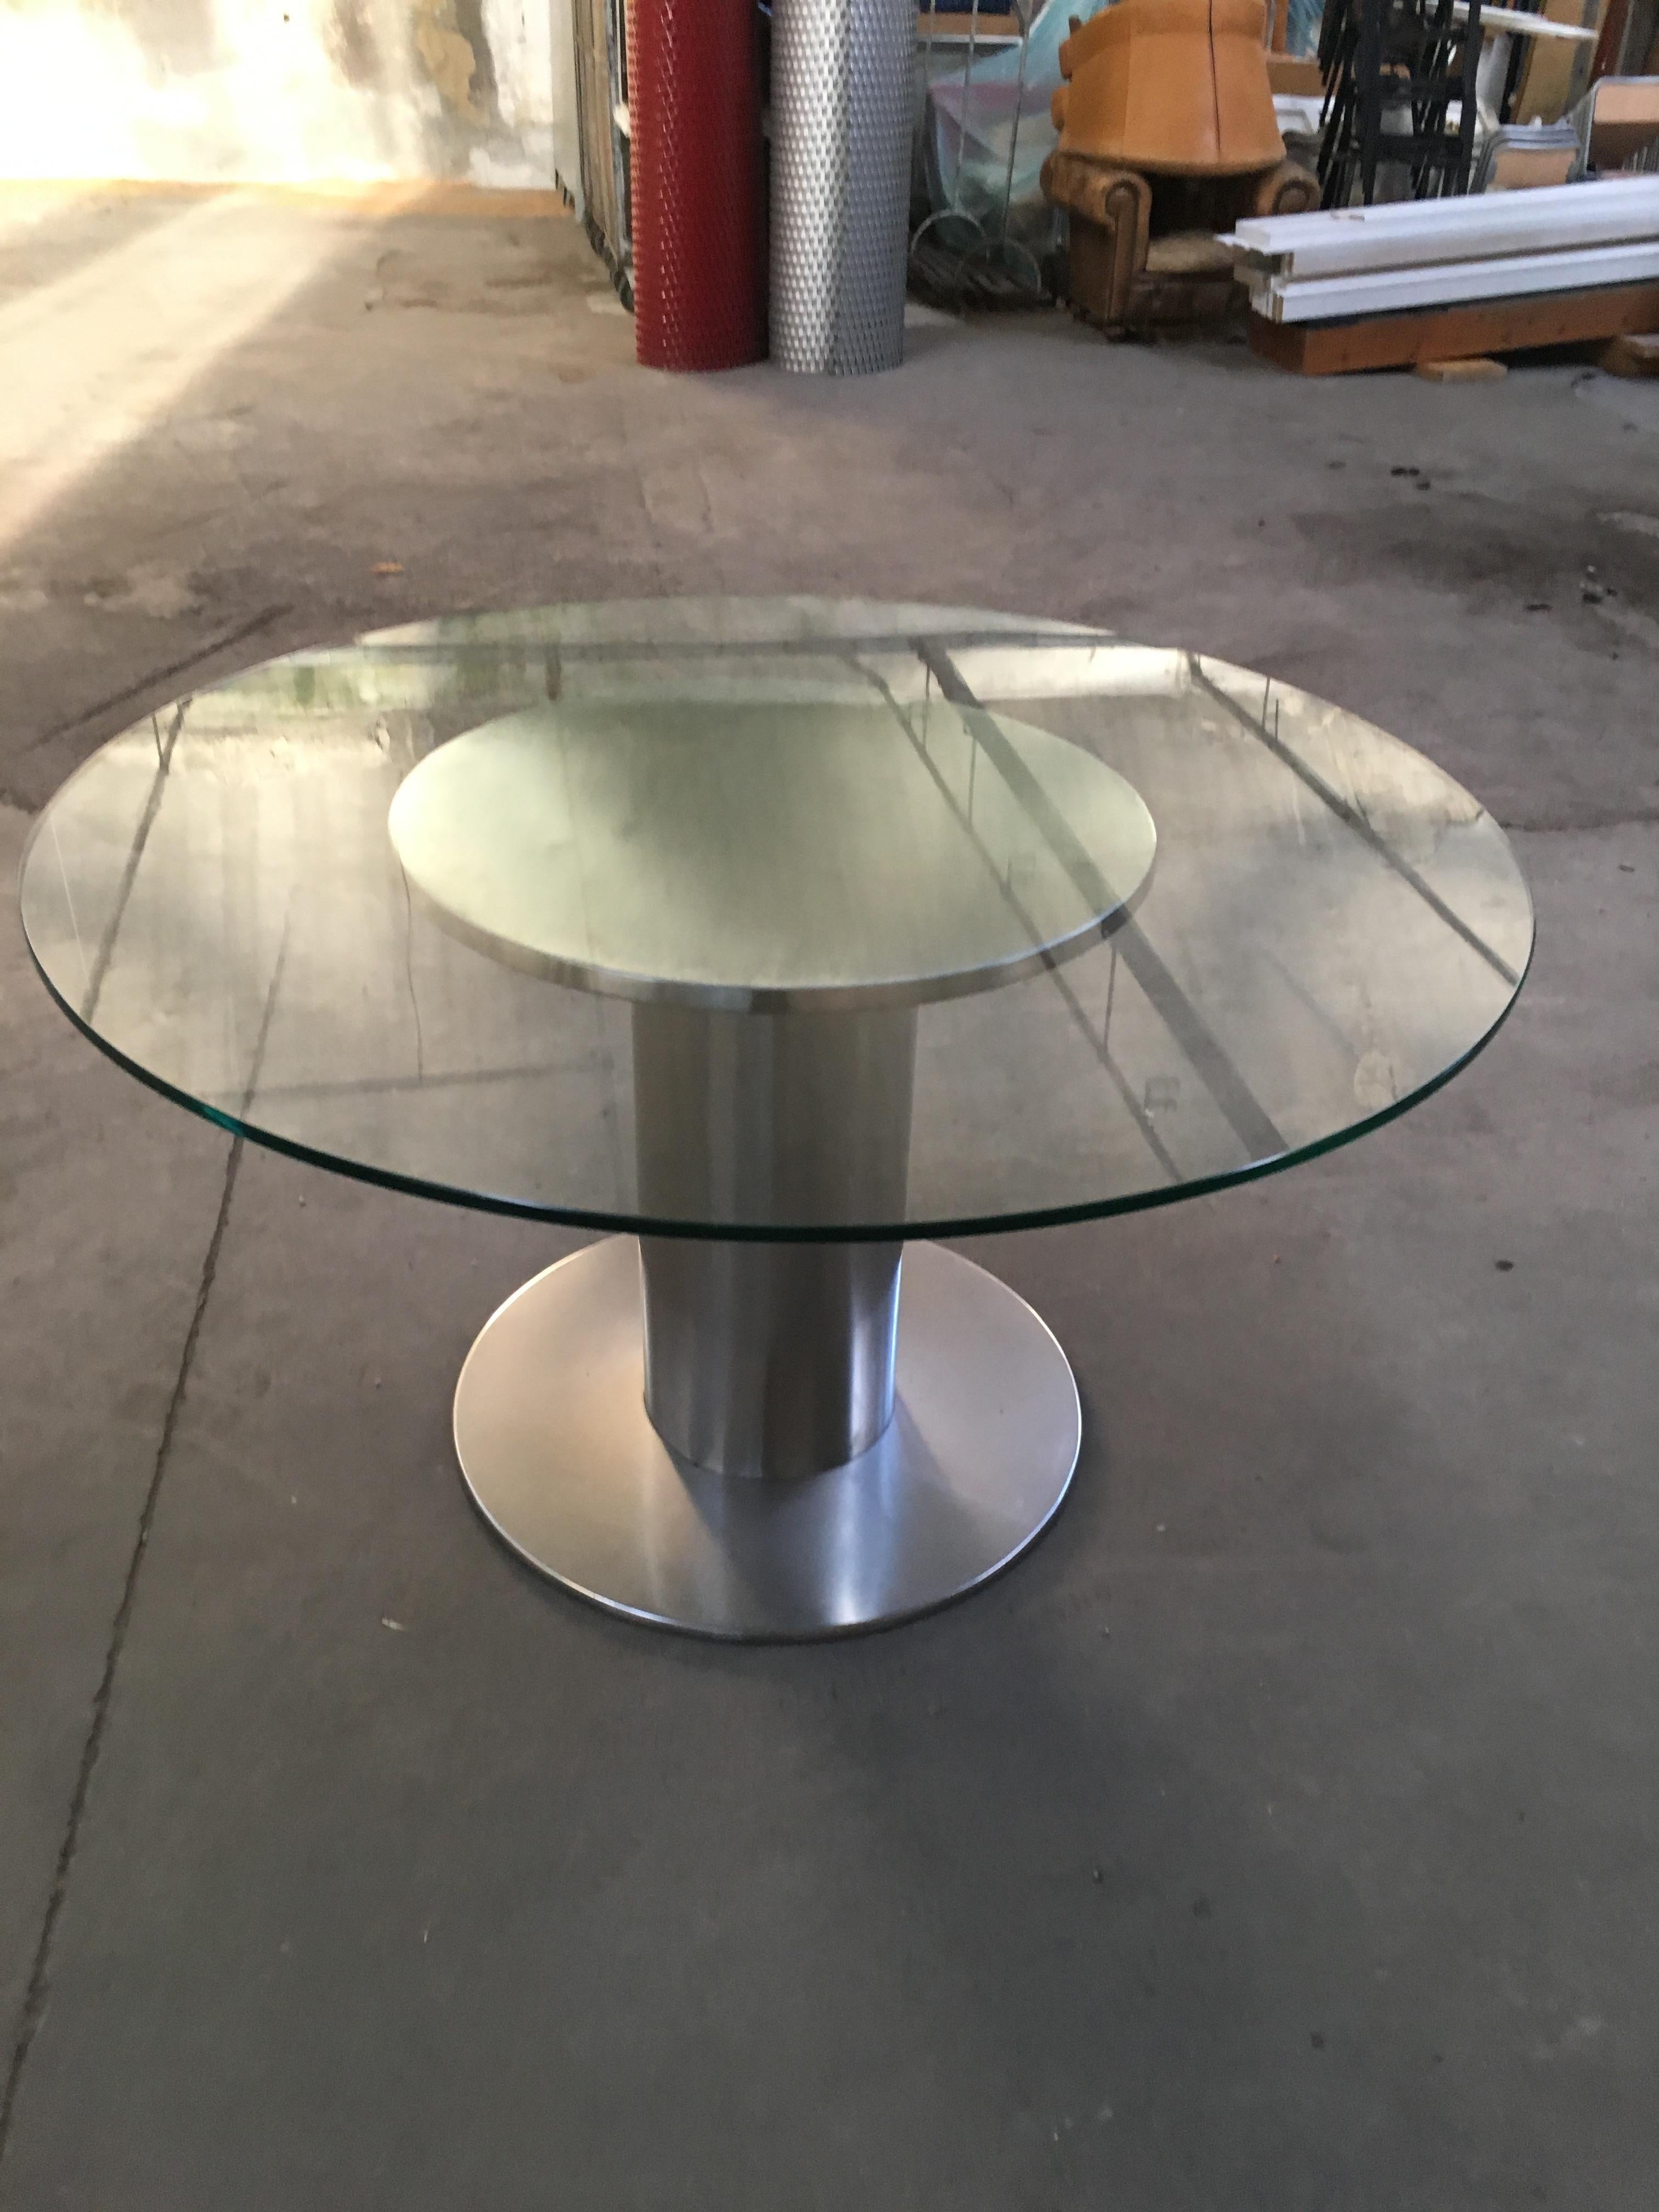 Stainless Steel Mid-Century Modern Italian Chrome Table with Round Glass Top from 1970s For Sale